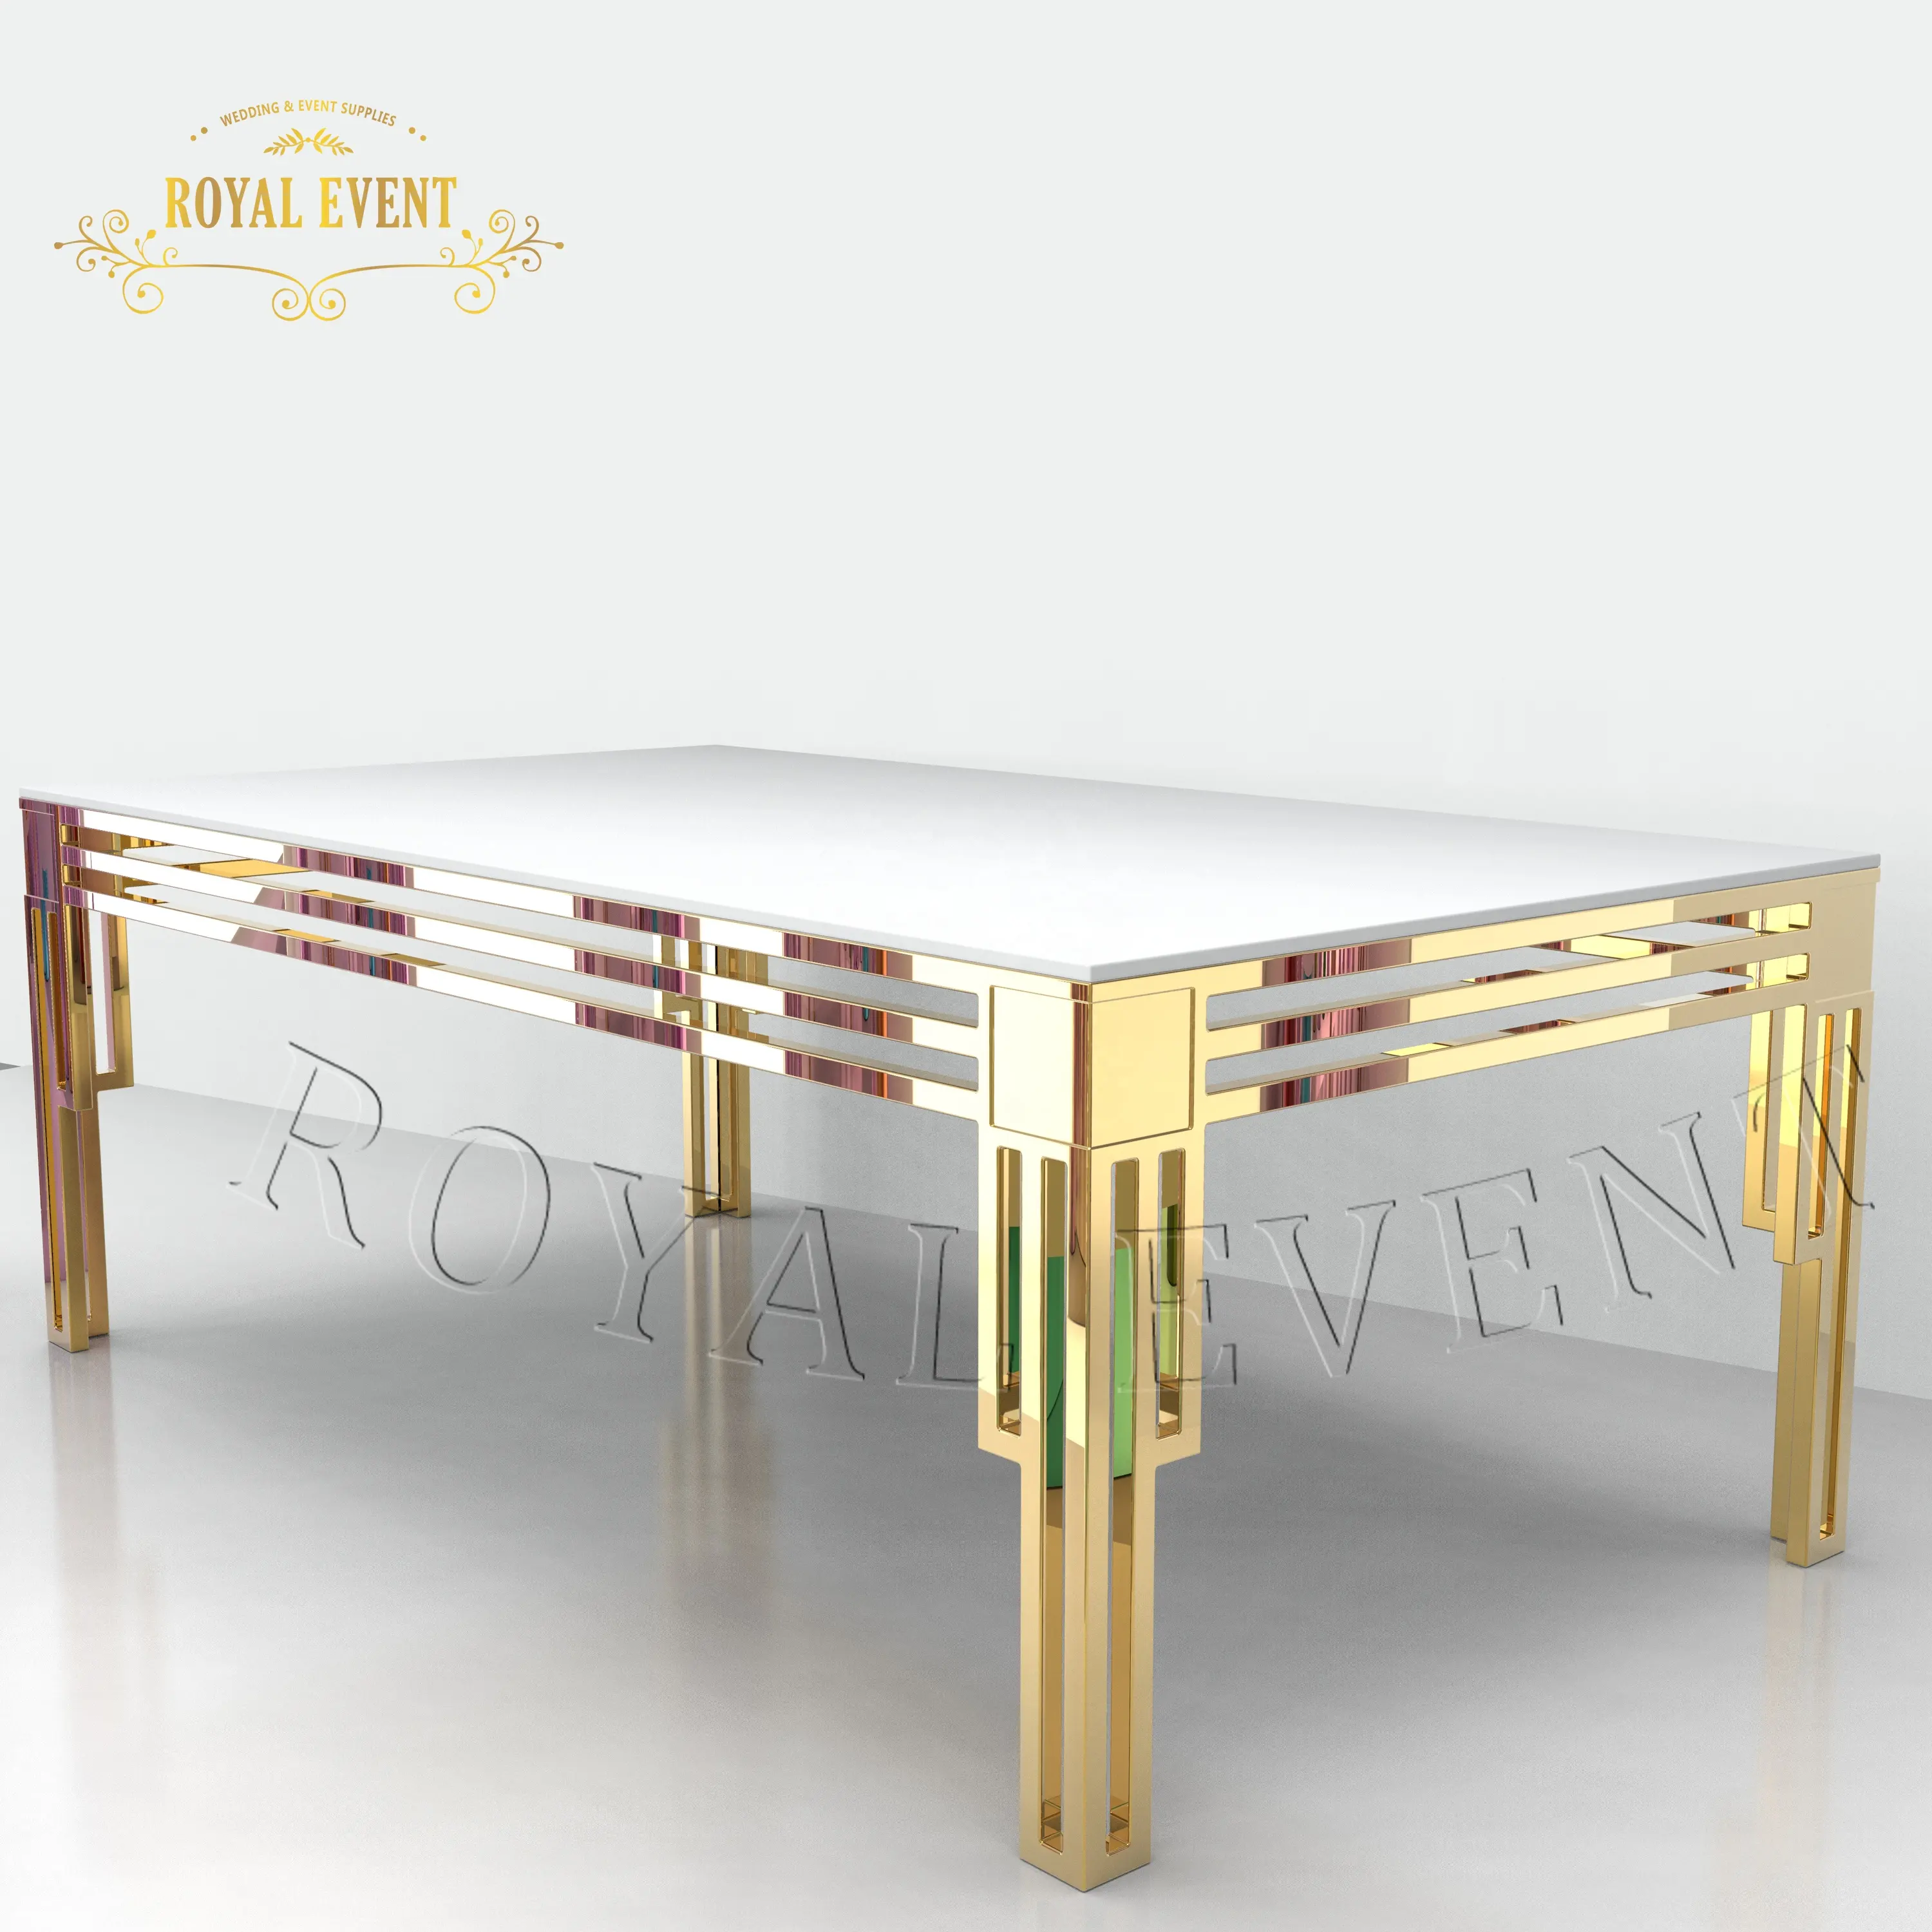 Luxury Hotel Furniture Stainless Steel Dining Table With Glass Wedding Table For Events